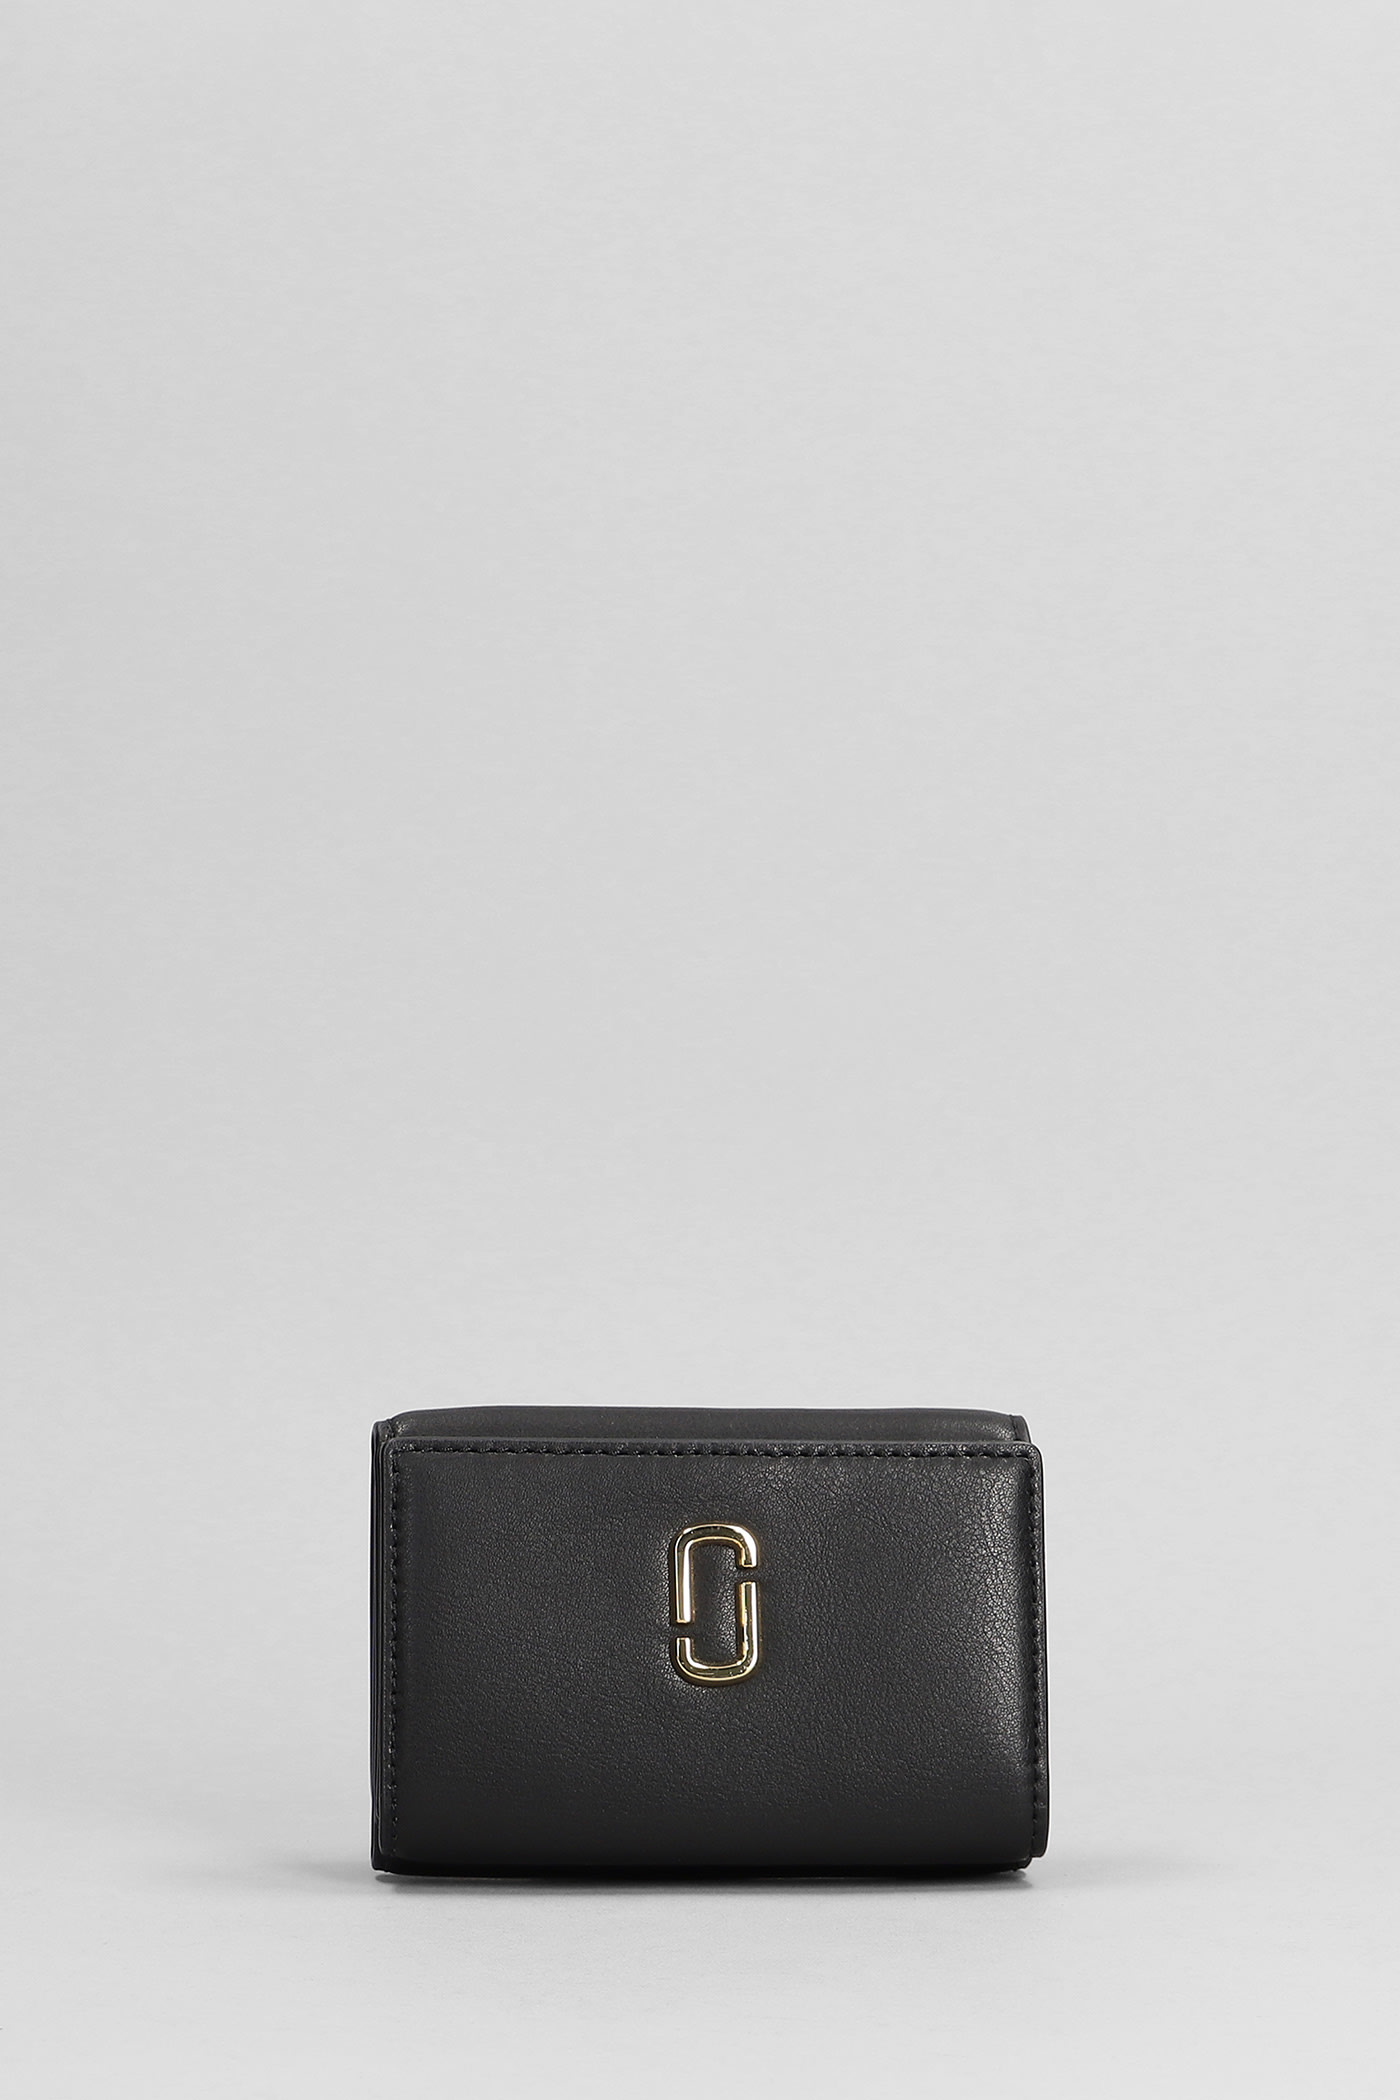 Marc Jacobs The Trifold Wallet In Black Leather